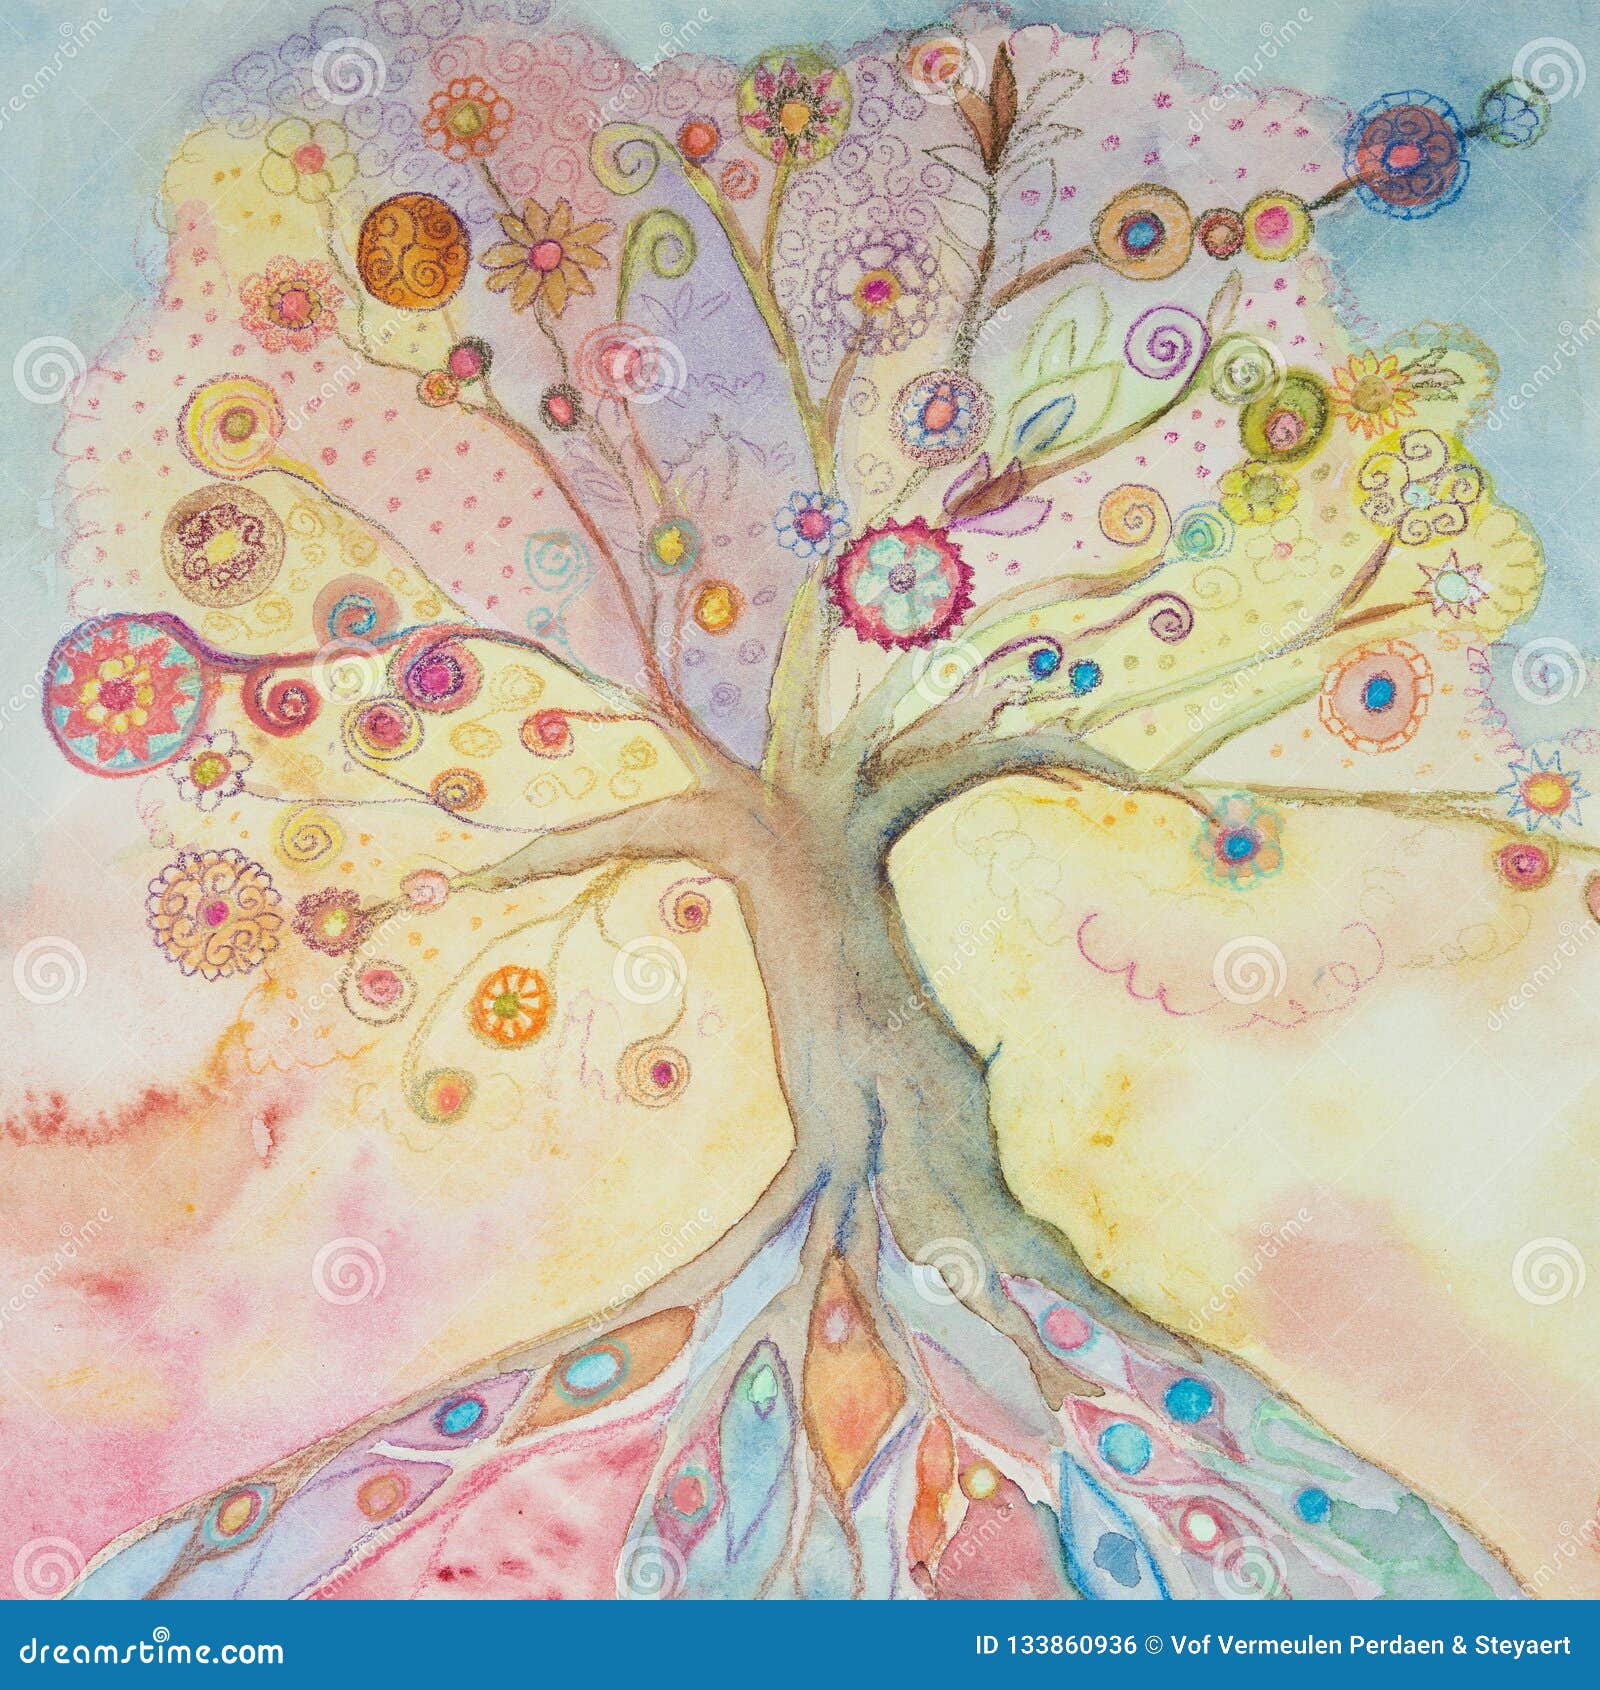 whimsical tree of life with pastel colors.